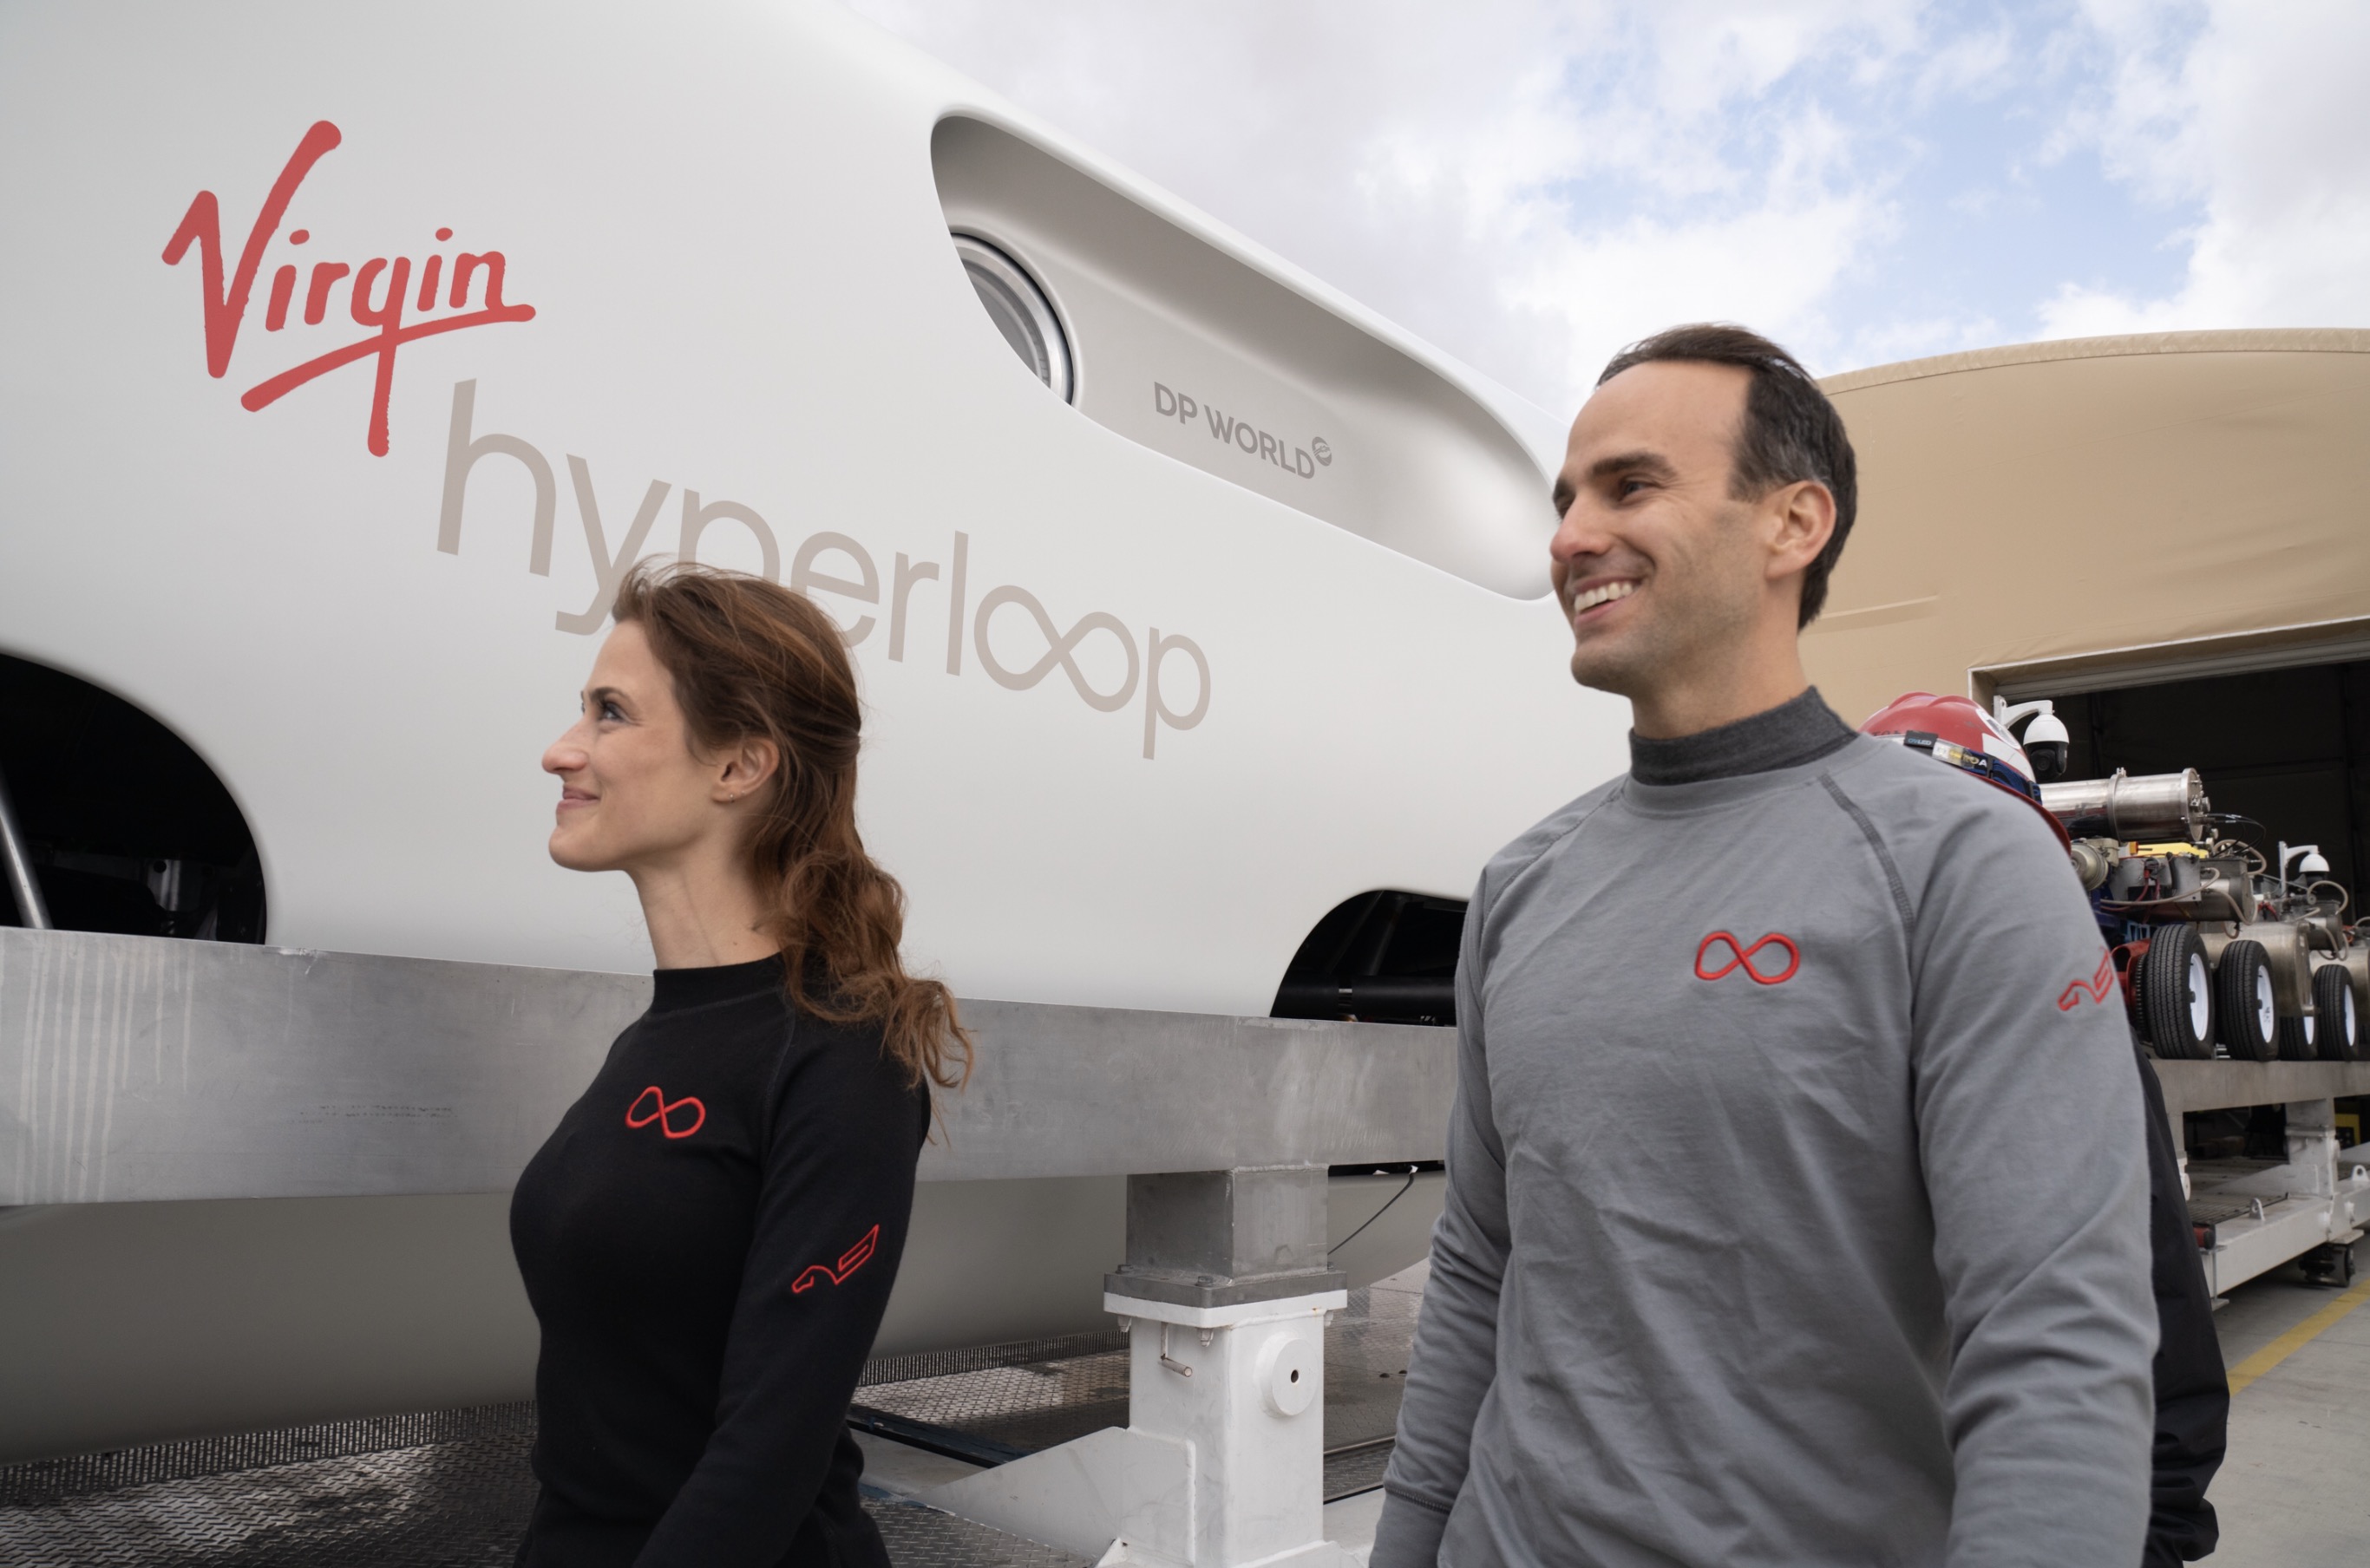 said Sara Luchian (left), Director of Passenger Experience for Virgin Hyperloop. “To me, the passenger experience ties it all together. And what better way to design the future than to actually experience it first-hand?”